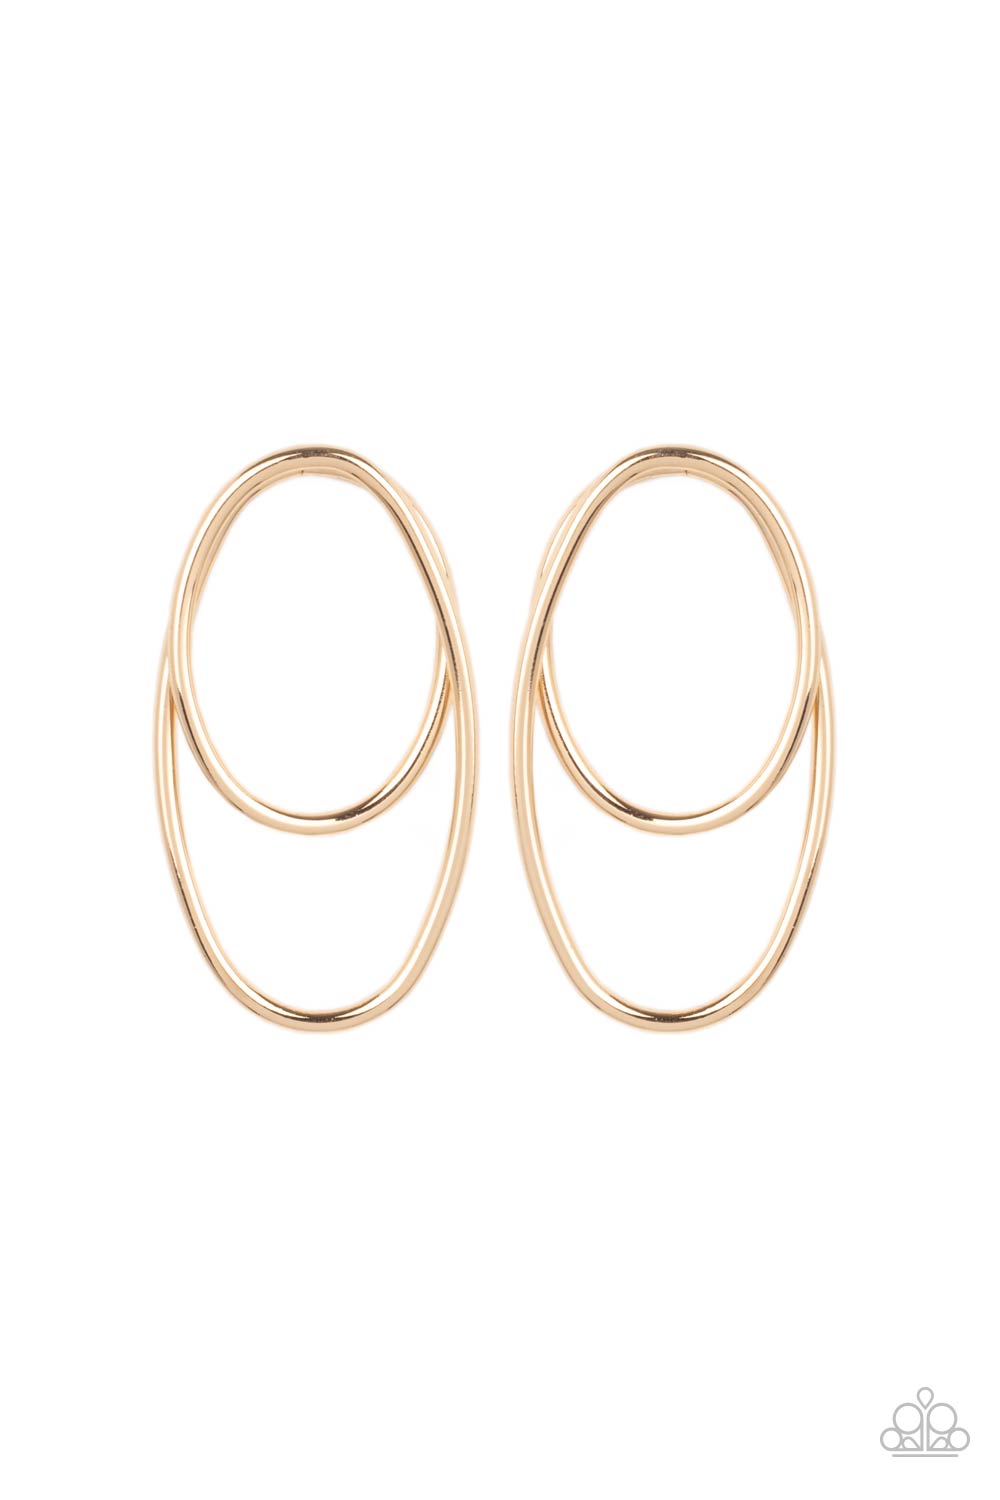 So OVAL-Dramatic Earrings - Gold